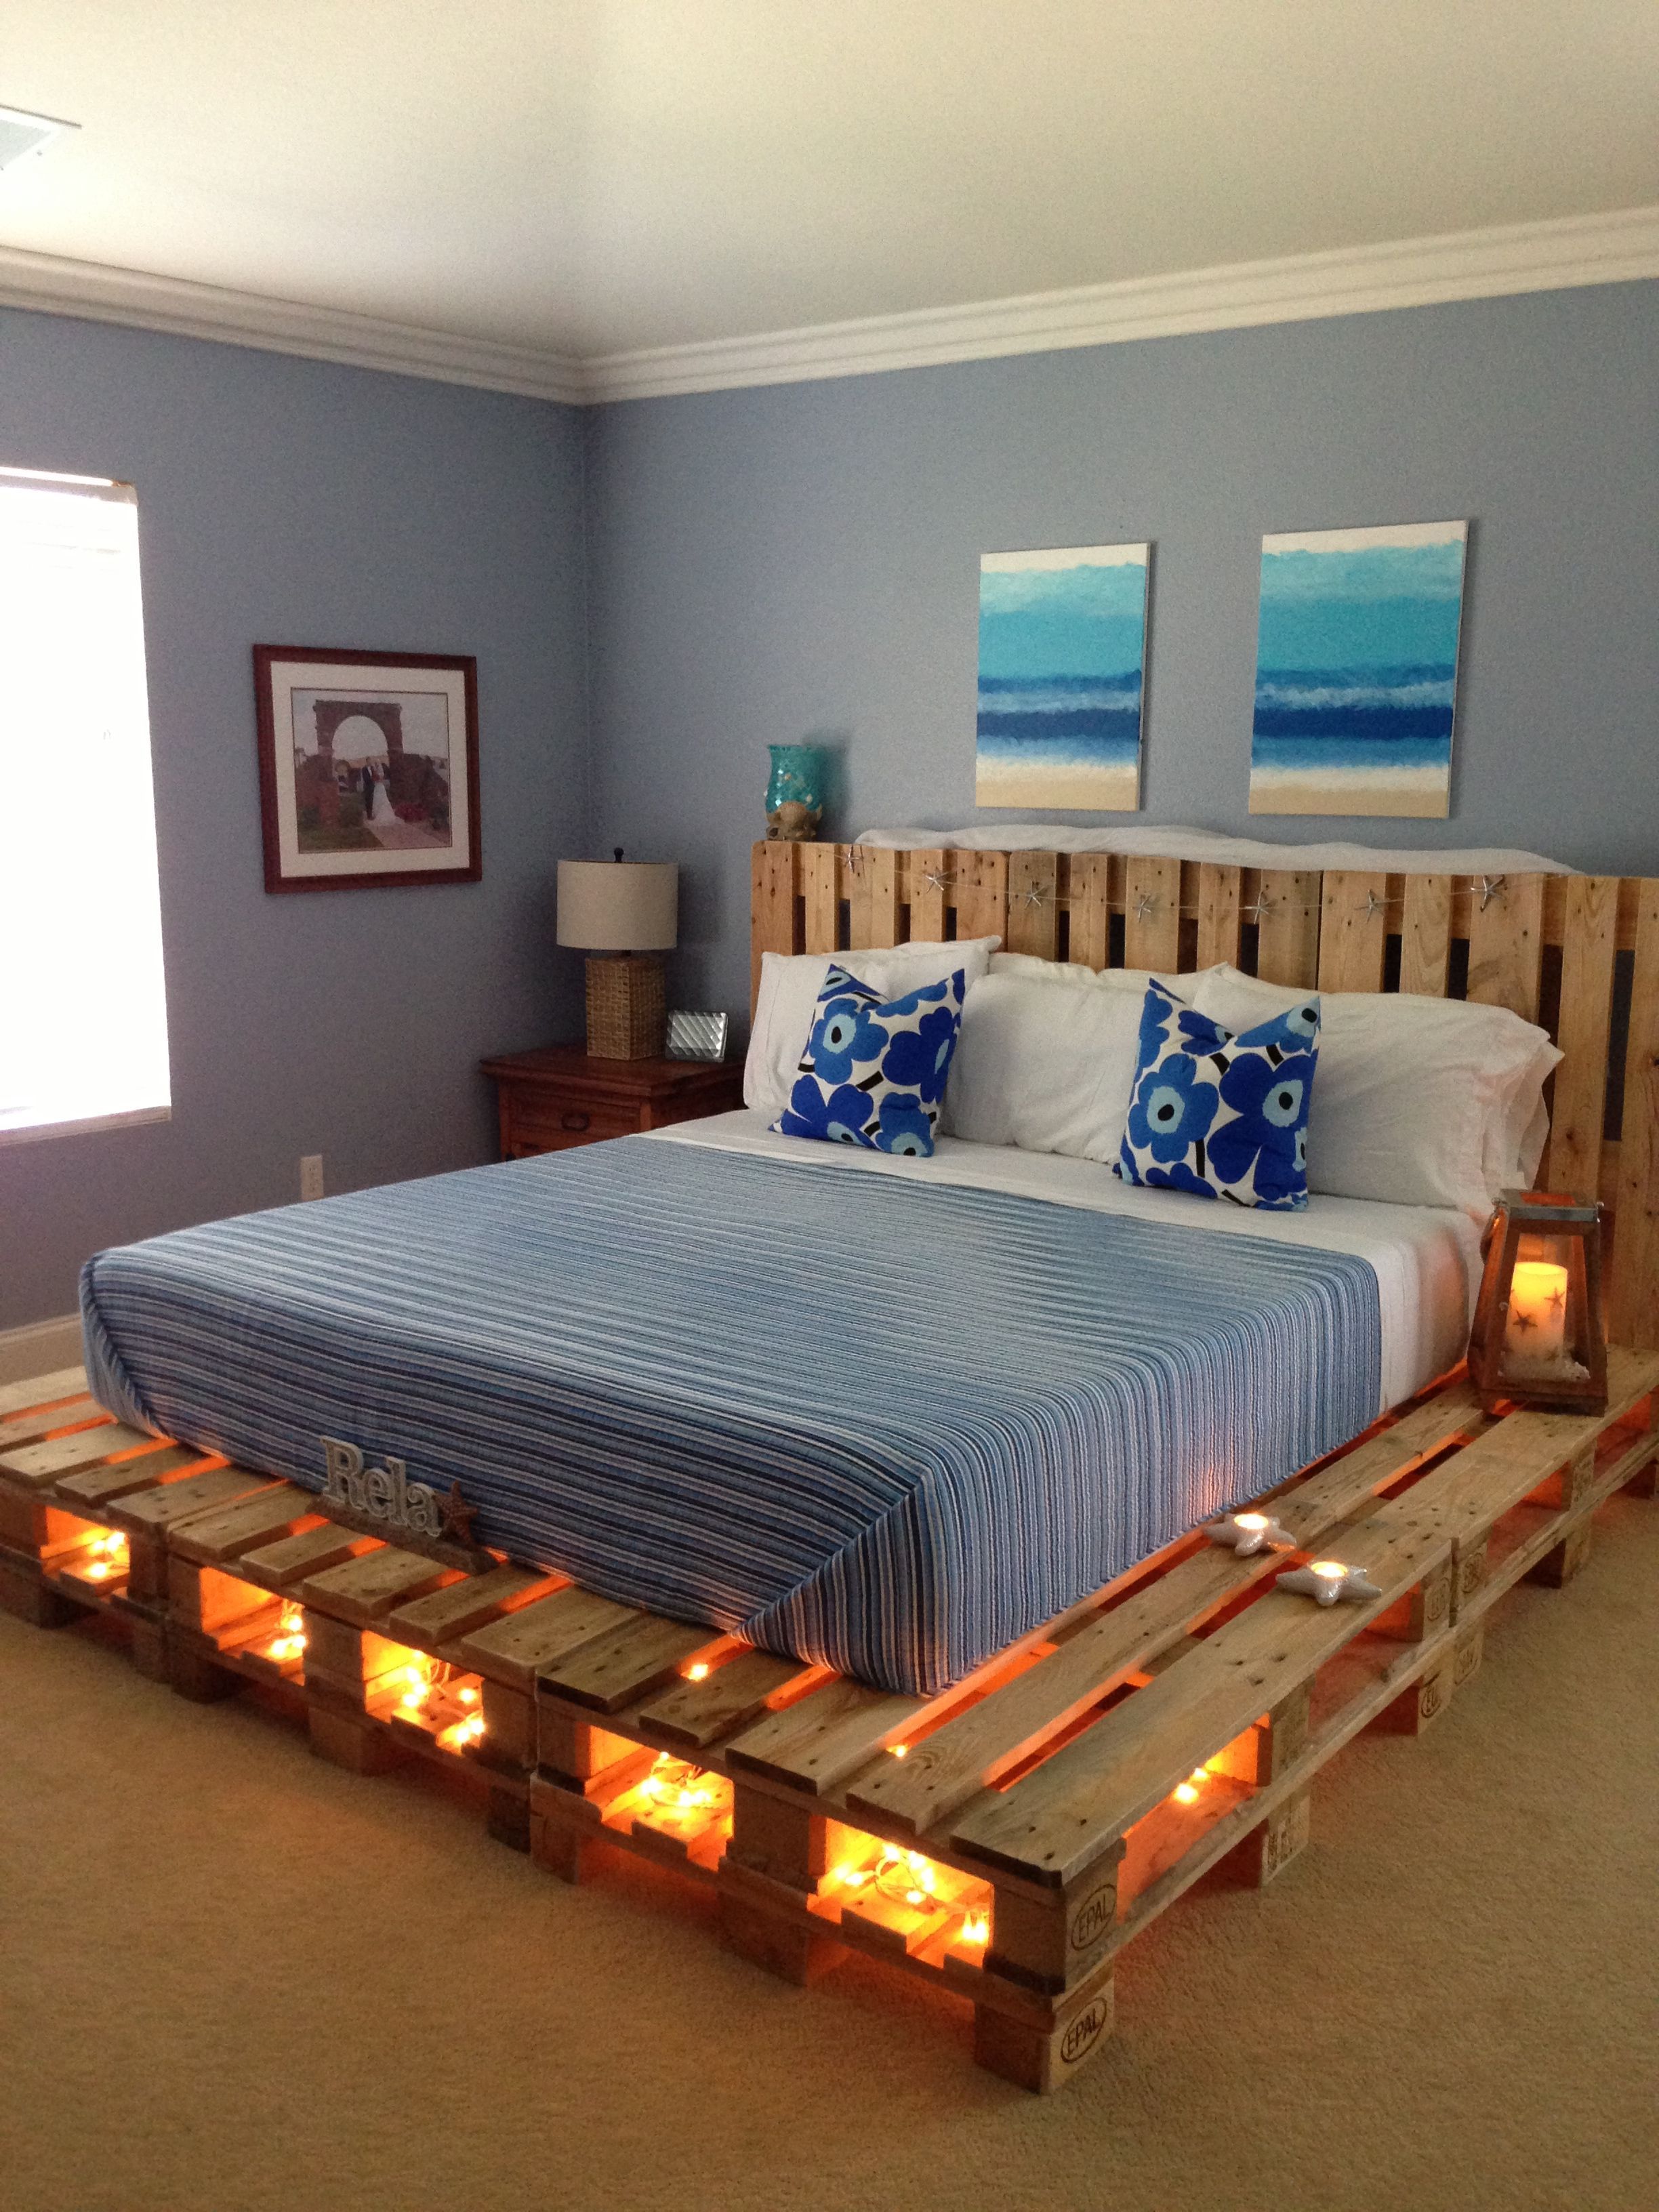 Ca king pallet bed made by hubby. Paintings above also painted by him and my daughter!